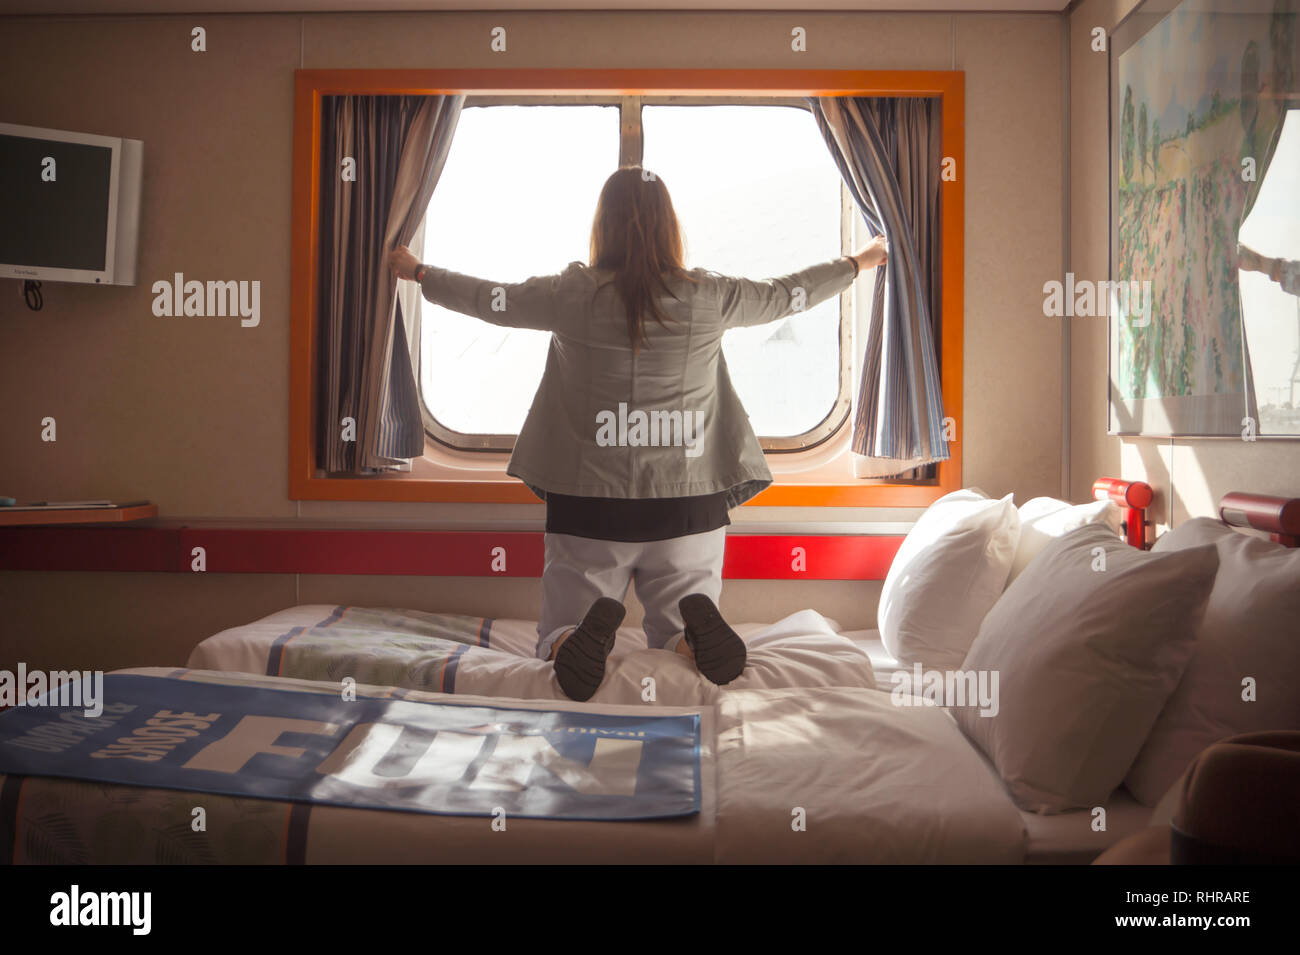 Woman Opening Curtains Happy High Resolution Stock Photography and Images -  Alamy